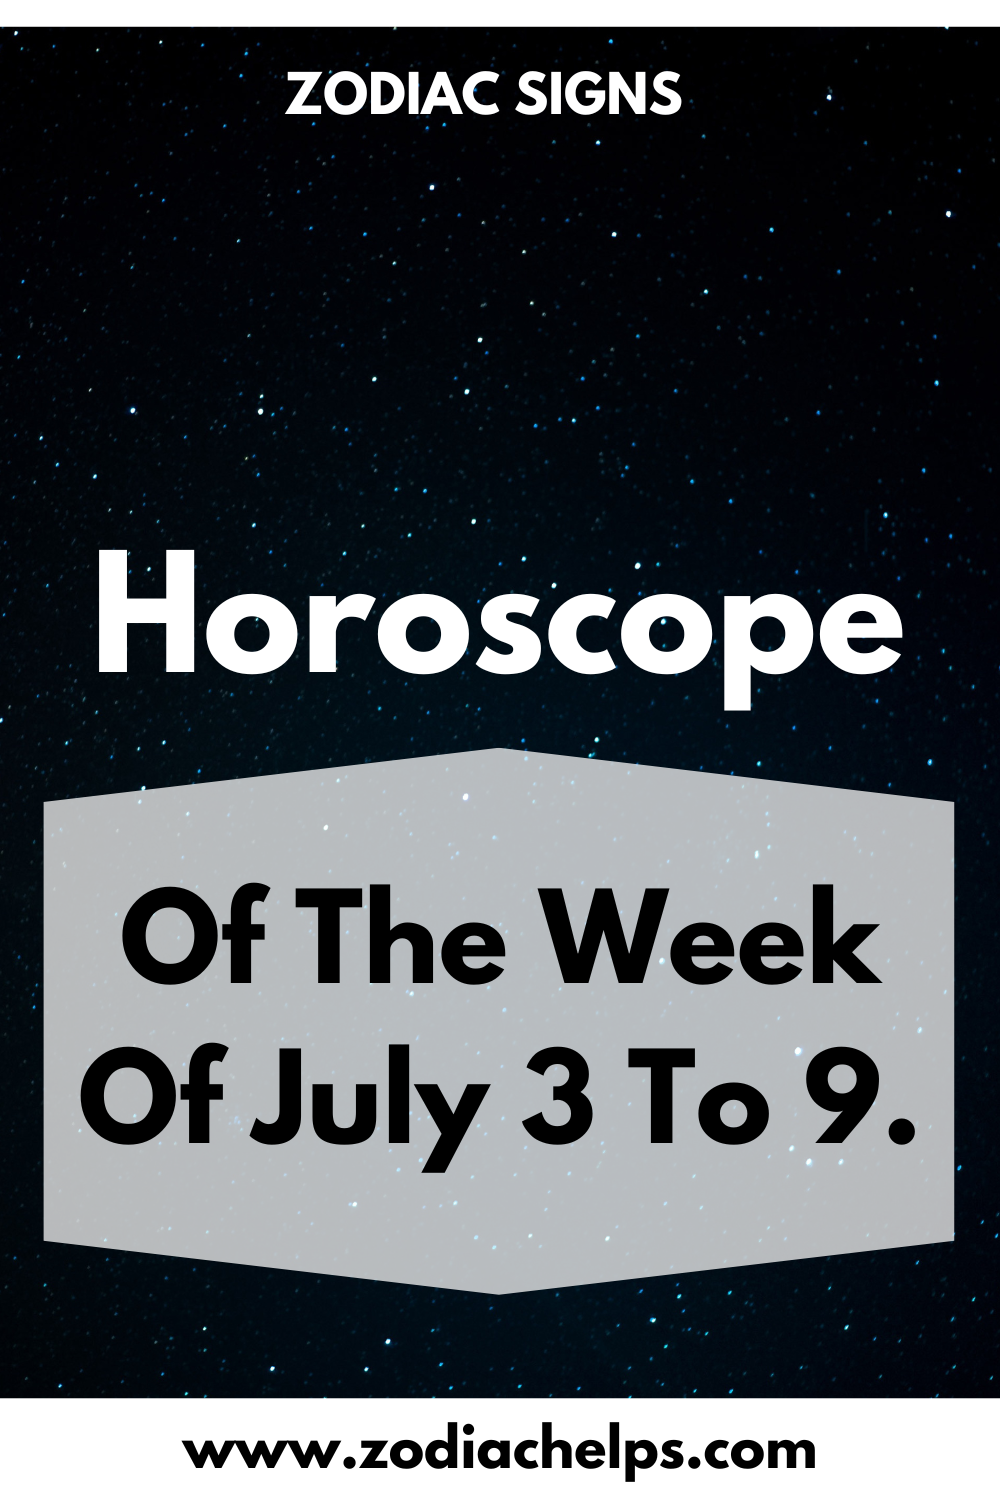 Horoscope Of The Week Of July 3 To 9.